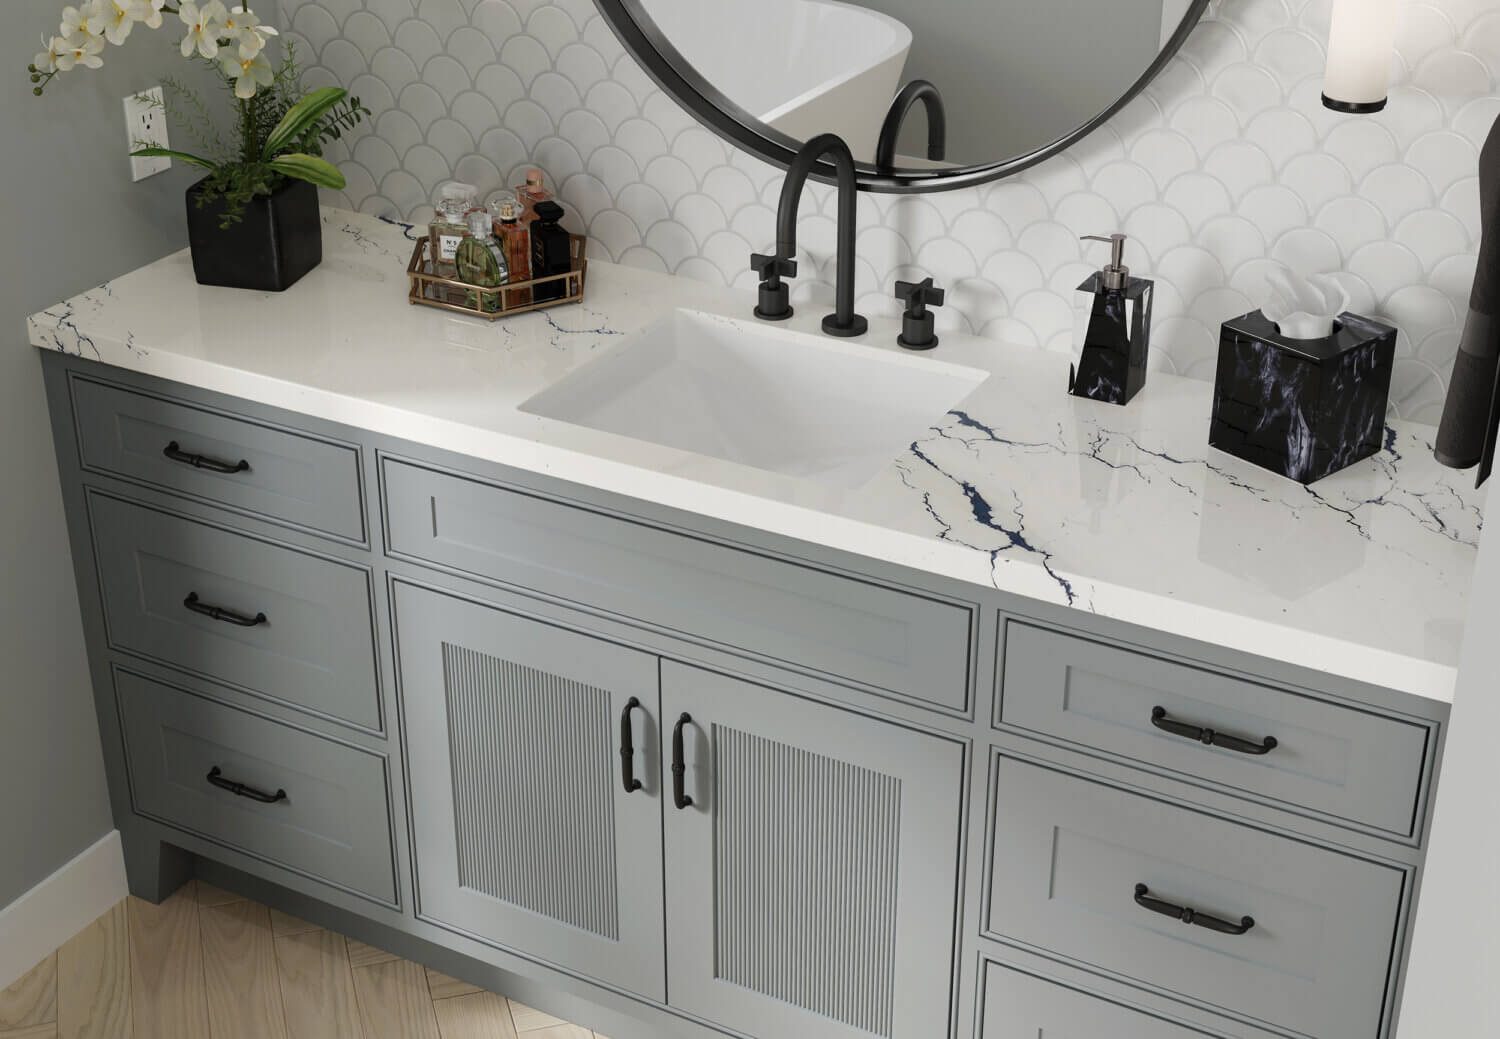 A close up of a gray vanity with reeded details on the doors and black hardware accents.